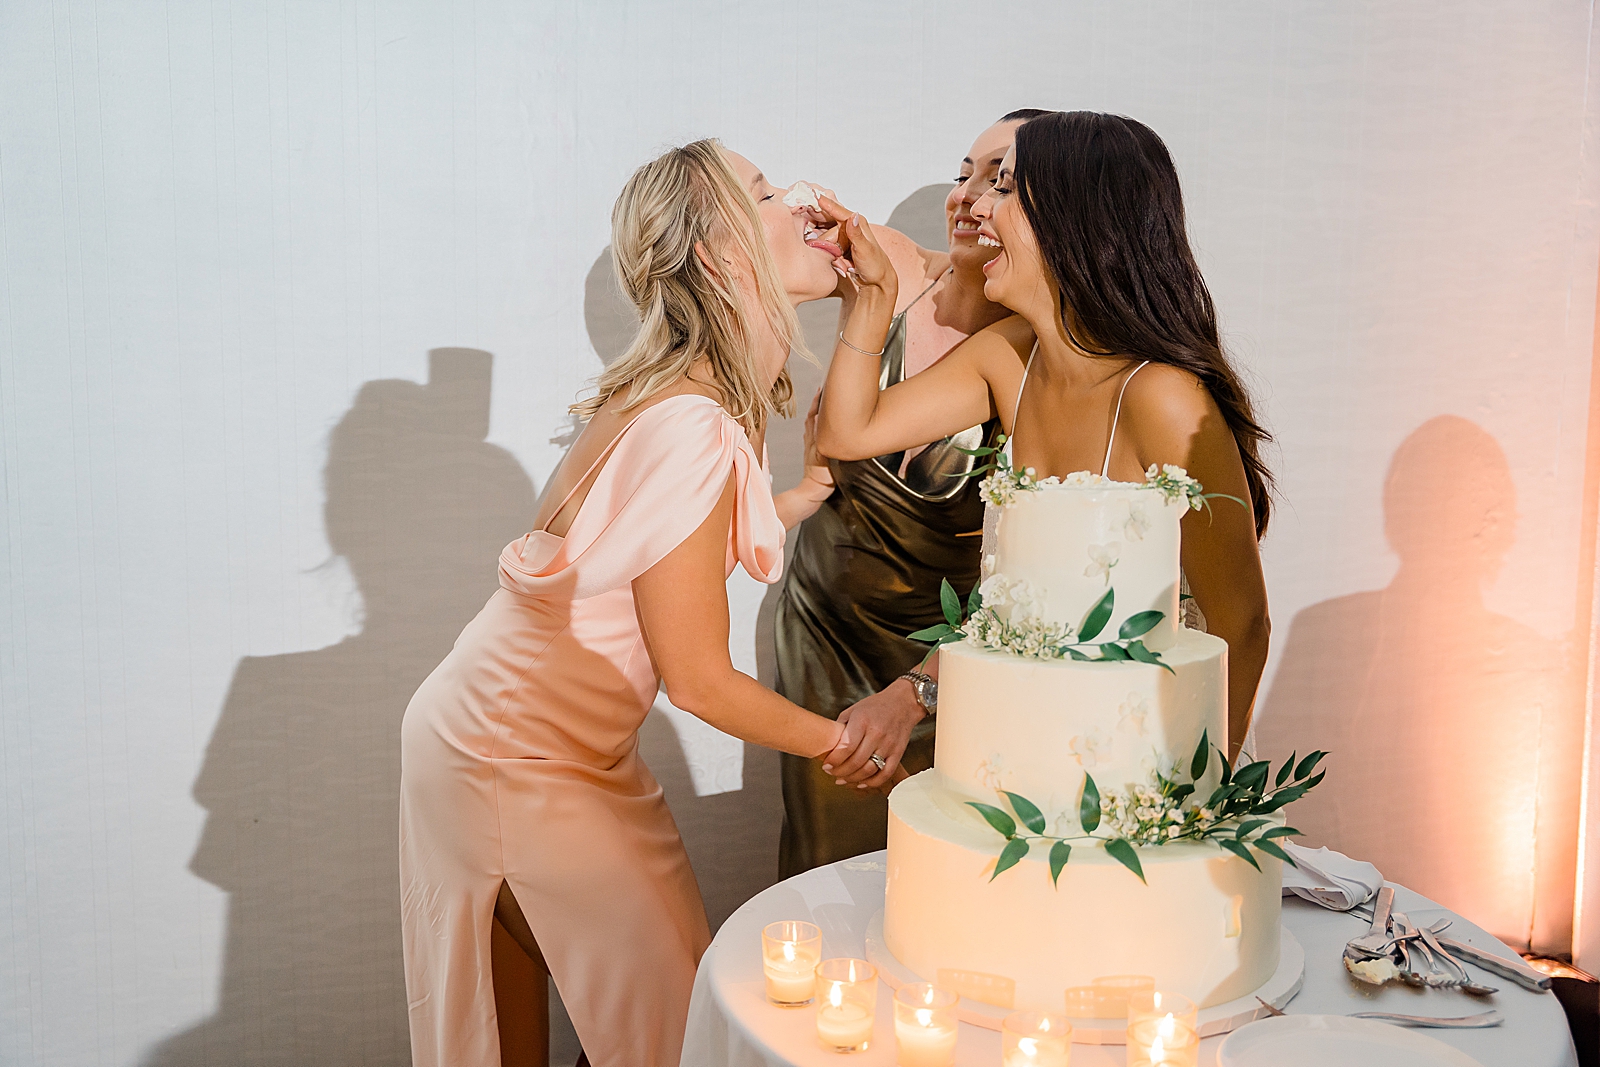 The bride is all smiles as she feeds her bridesmaid cake.